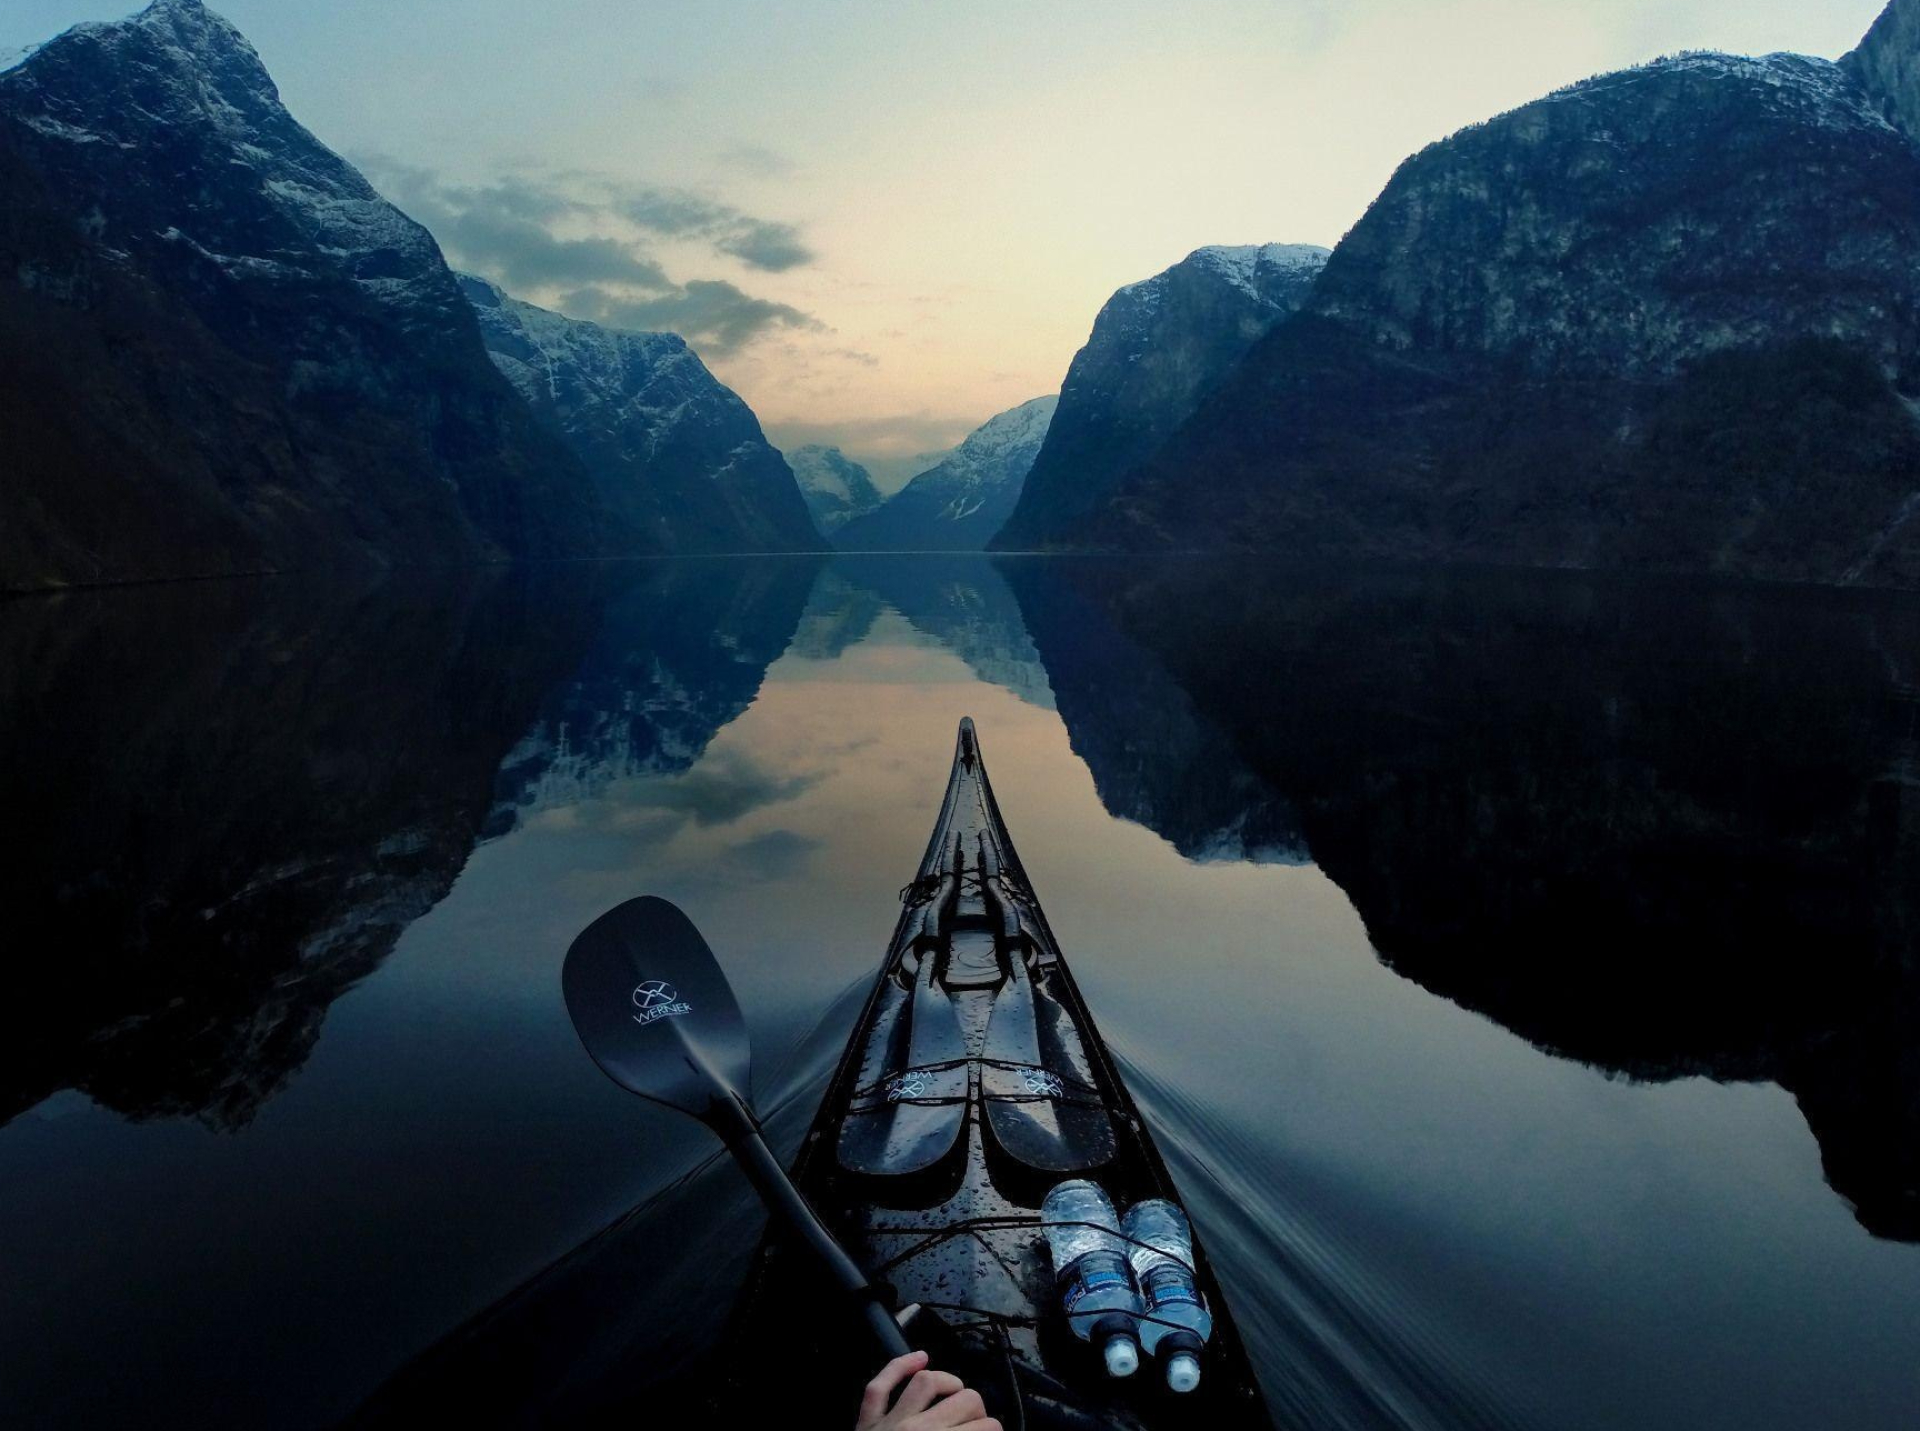 Kayaking: Canoe camping, Expedition canoeing, The use of a small watercraft to travel across the mountain lake. 1920x1440 HD Background.